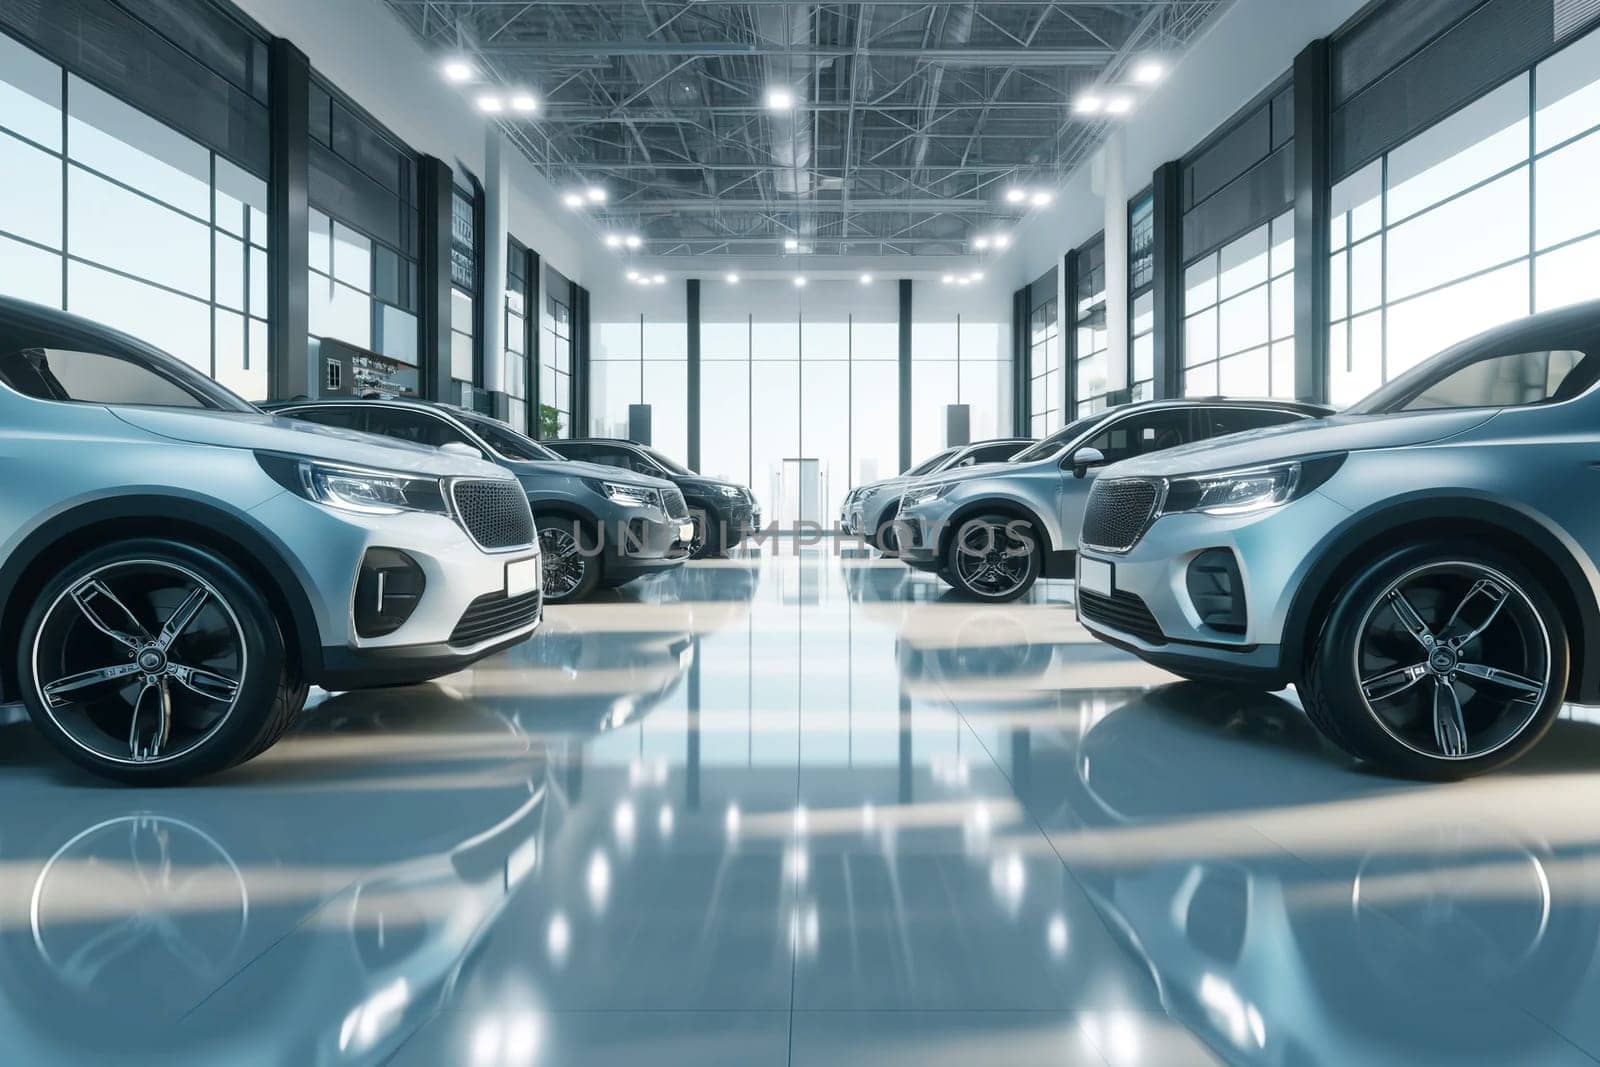 new cars in a large car showroom by Annado